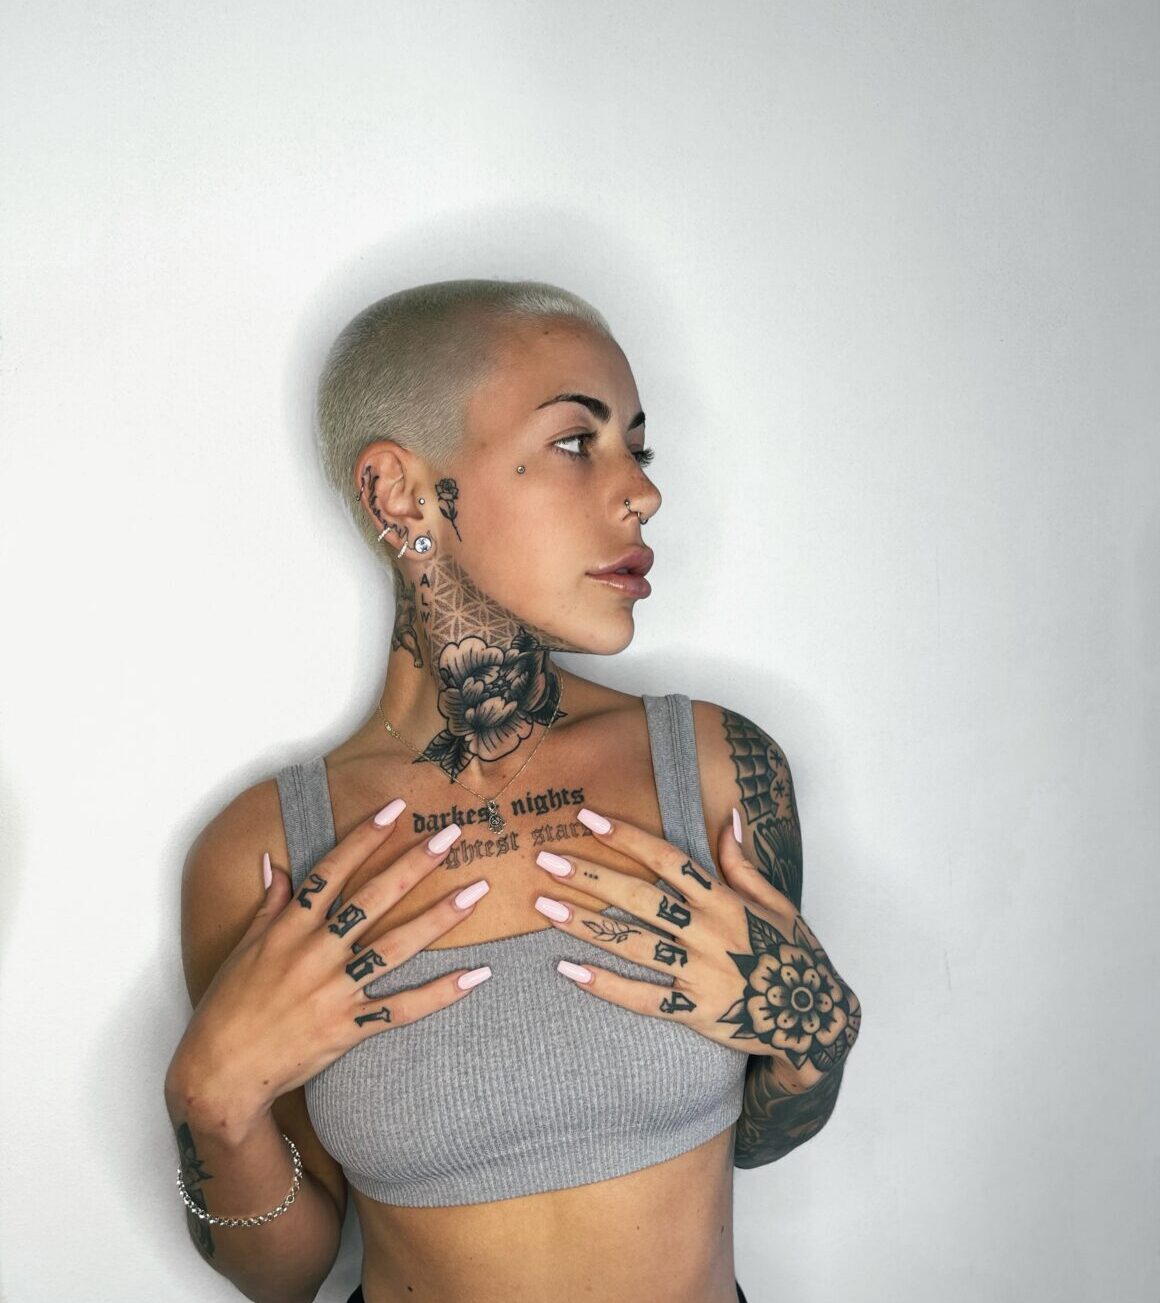 Here's Macey the tattoo model from the Golden Coast - Tattoo Life